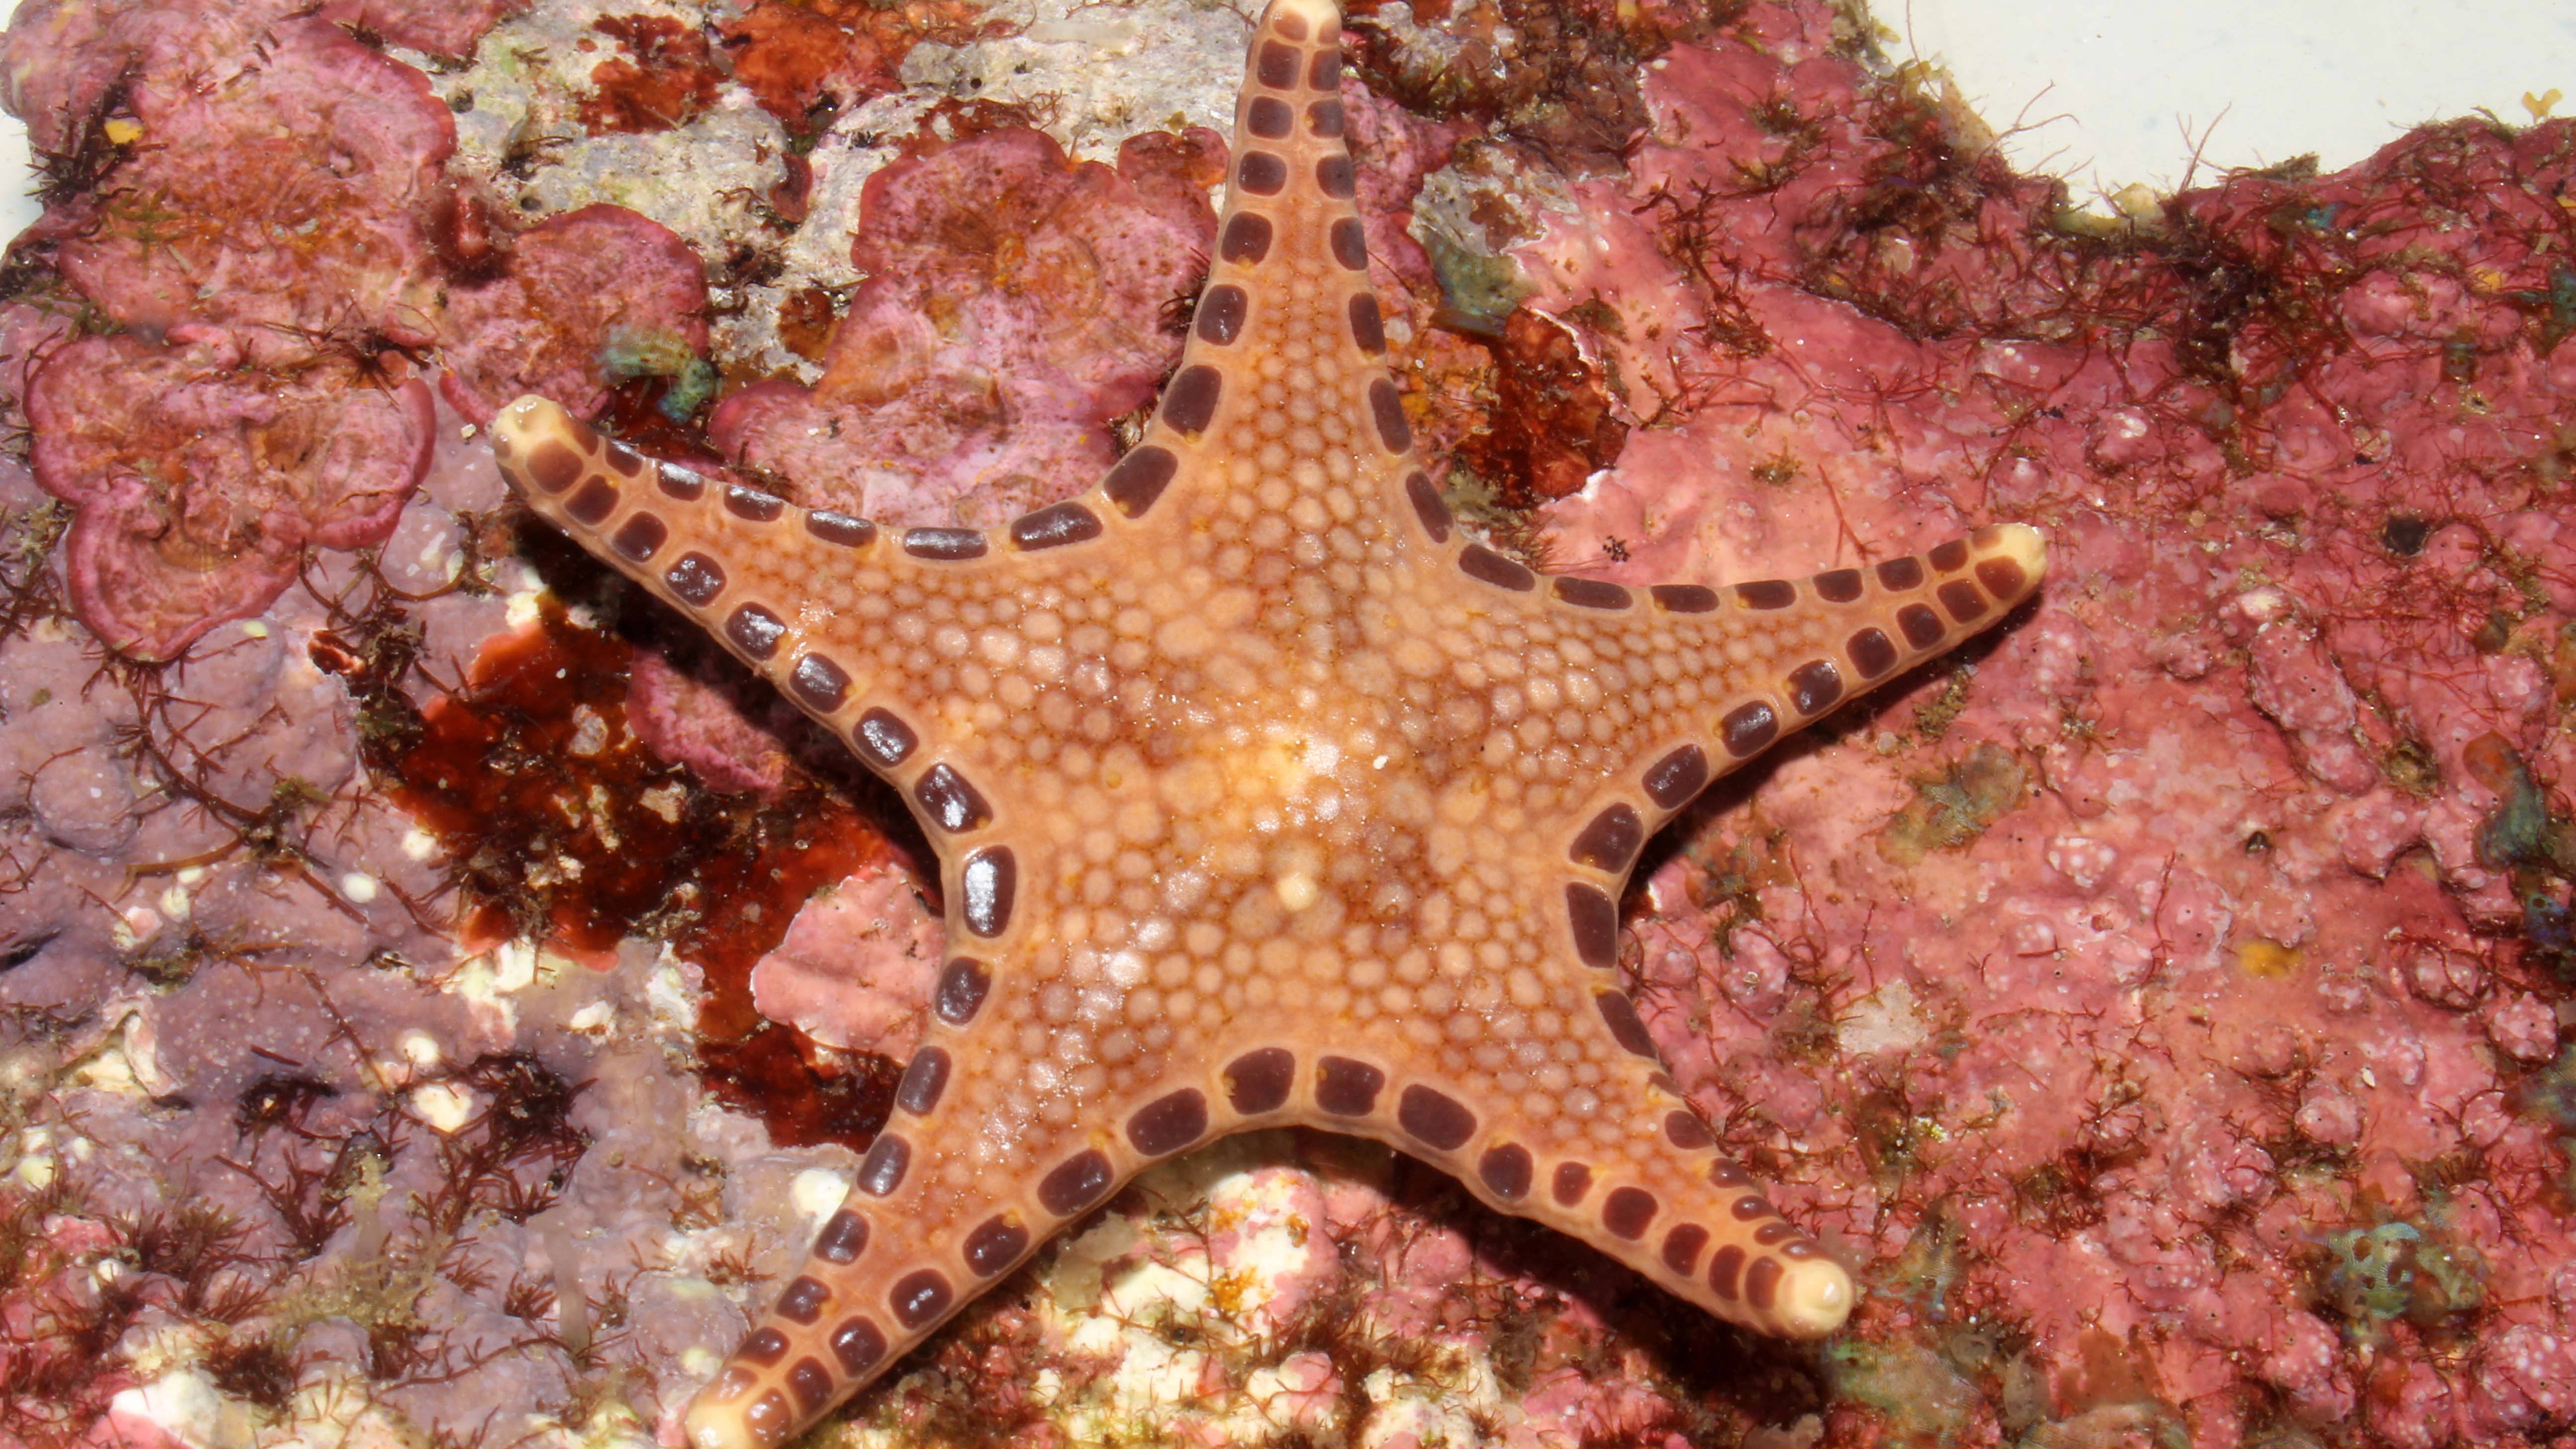 One of the new species found in the Verde Island Passage, a seastar identified to be among the Neoferdina genus. (California Academy of Sciences)